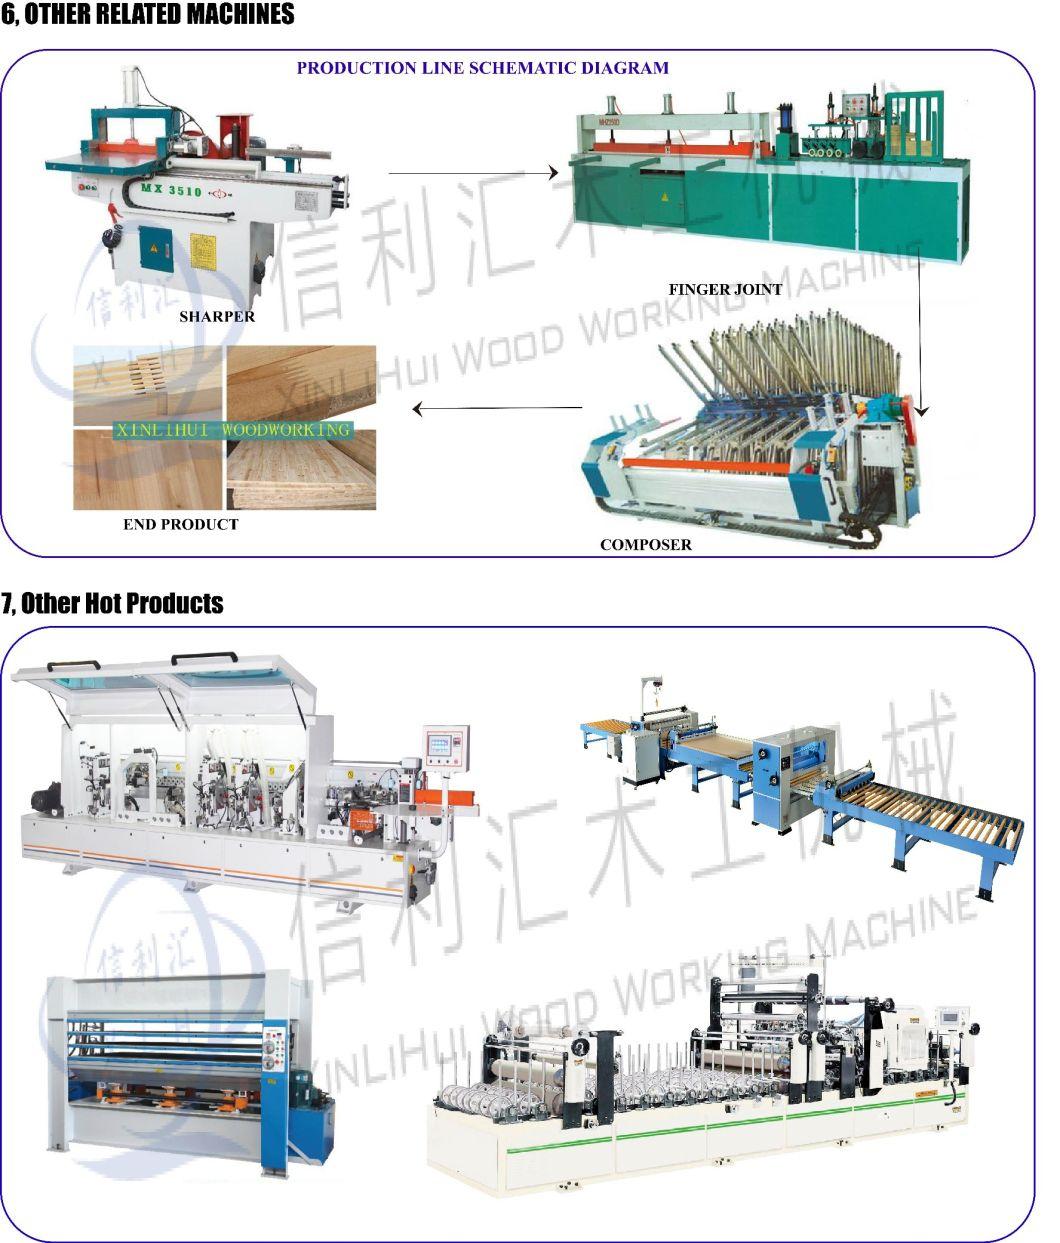 Most Popular Model Latest Finger Joint Wood Assembler Machine/ New Woodworking Machinery Semi-Automatic Finger Joint Line for Furniture Making